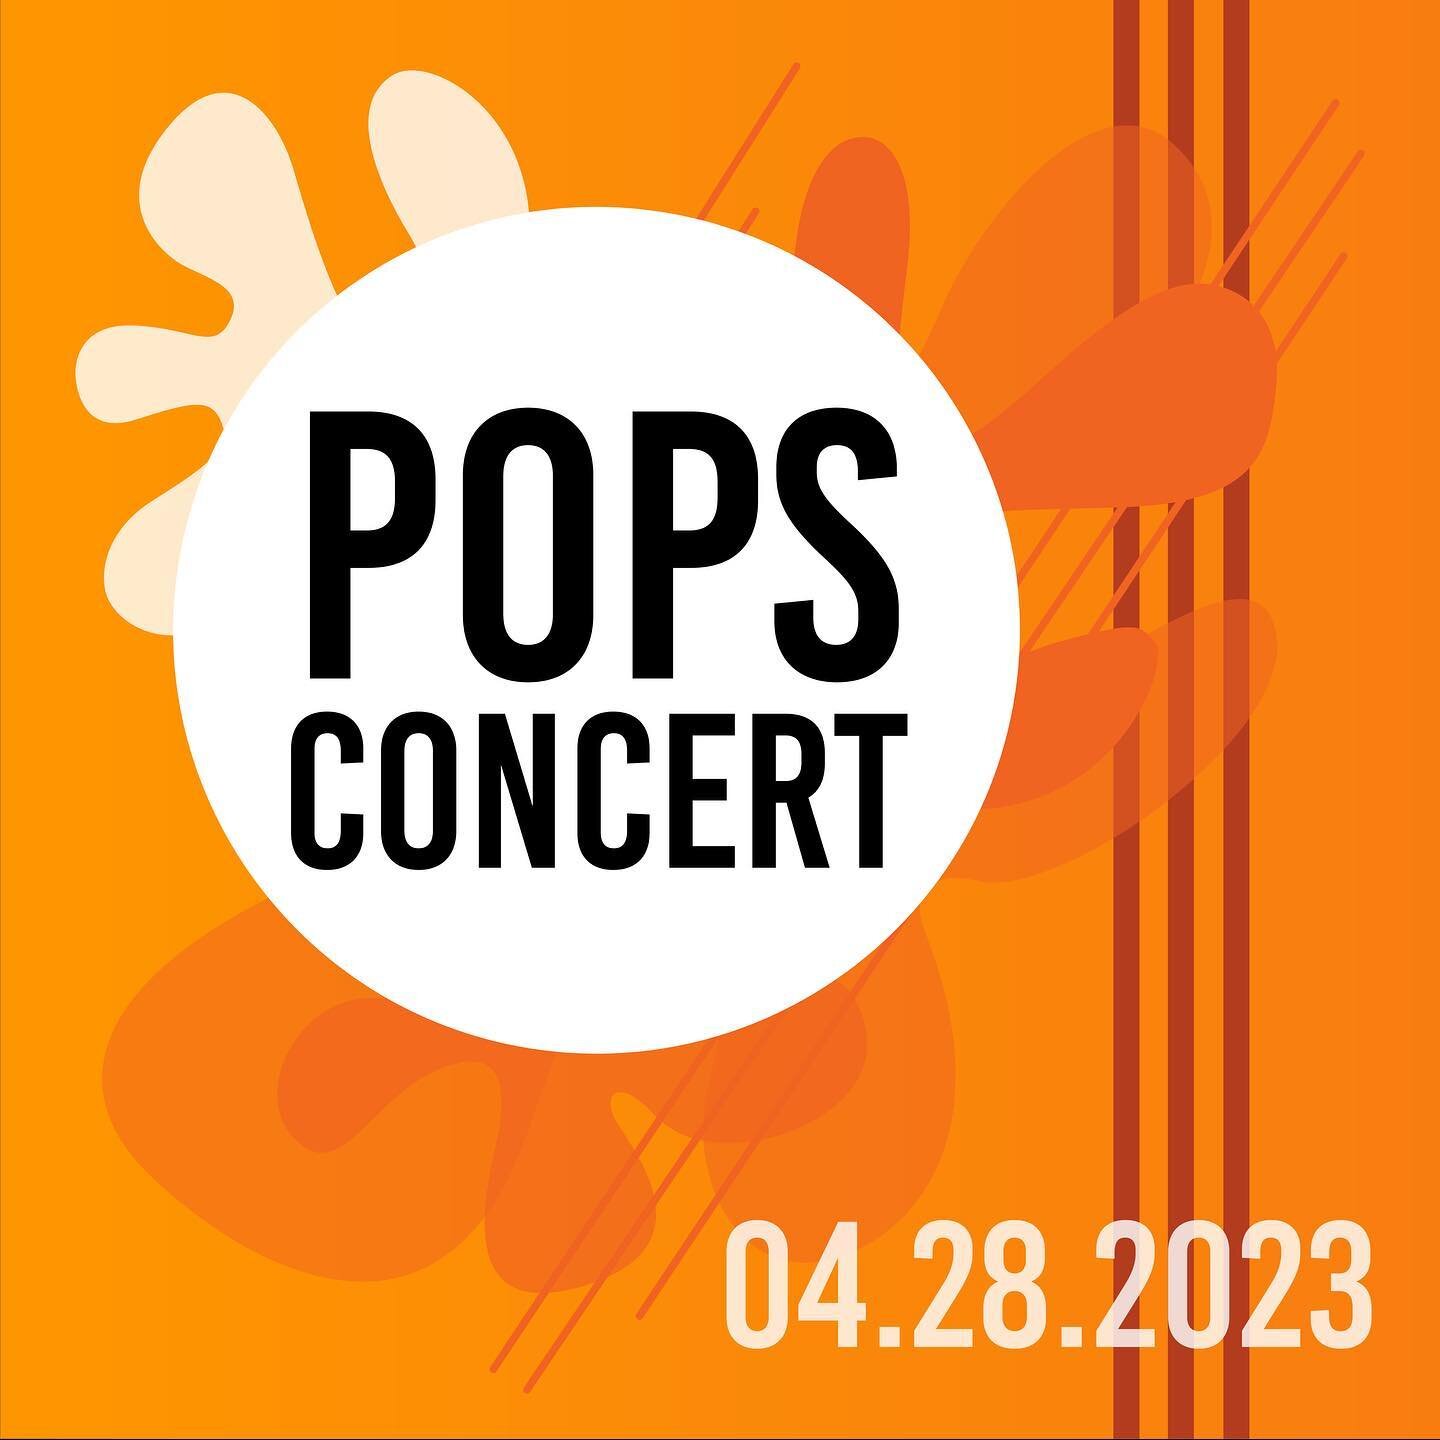 The West Covina High School Choral Department proudly presents

2023 POPs Concert
April 28, 2023; 7pm (PST)
West Covina High School - 
GYM

Join us for this incredible concert featuring performances from all ensembles from The West Covina High School